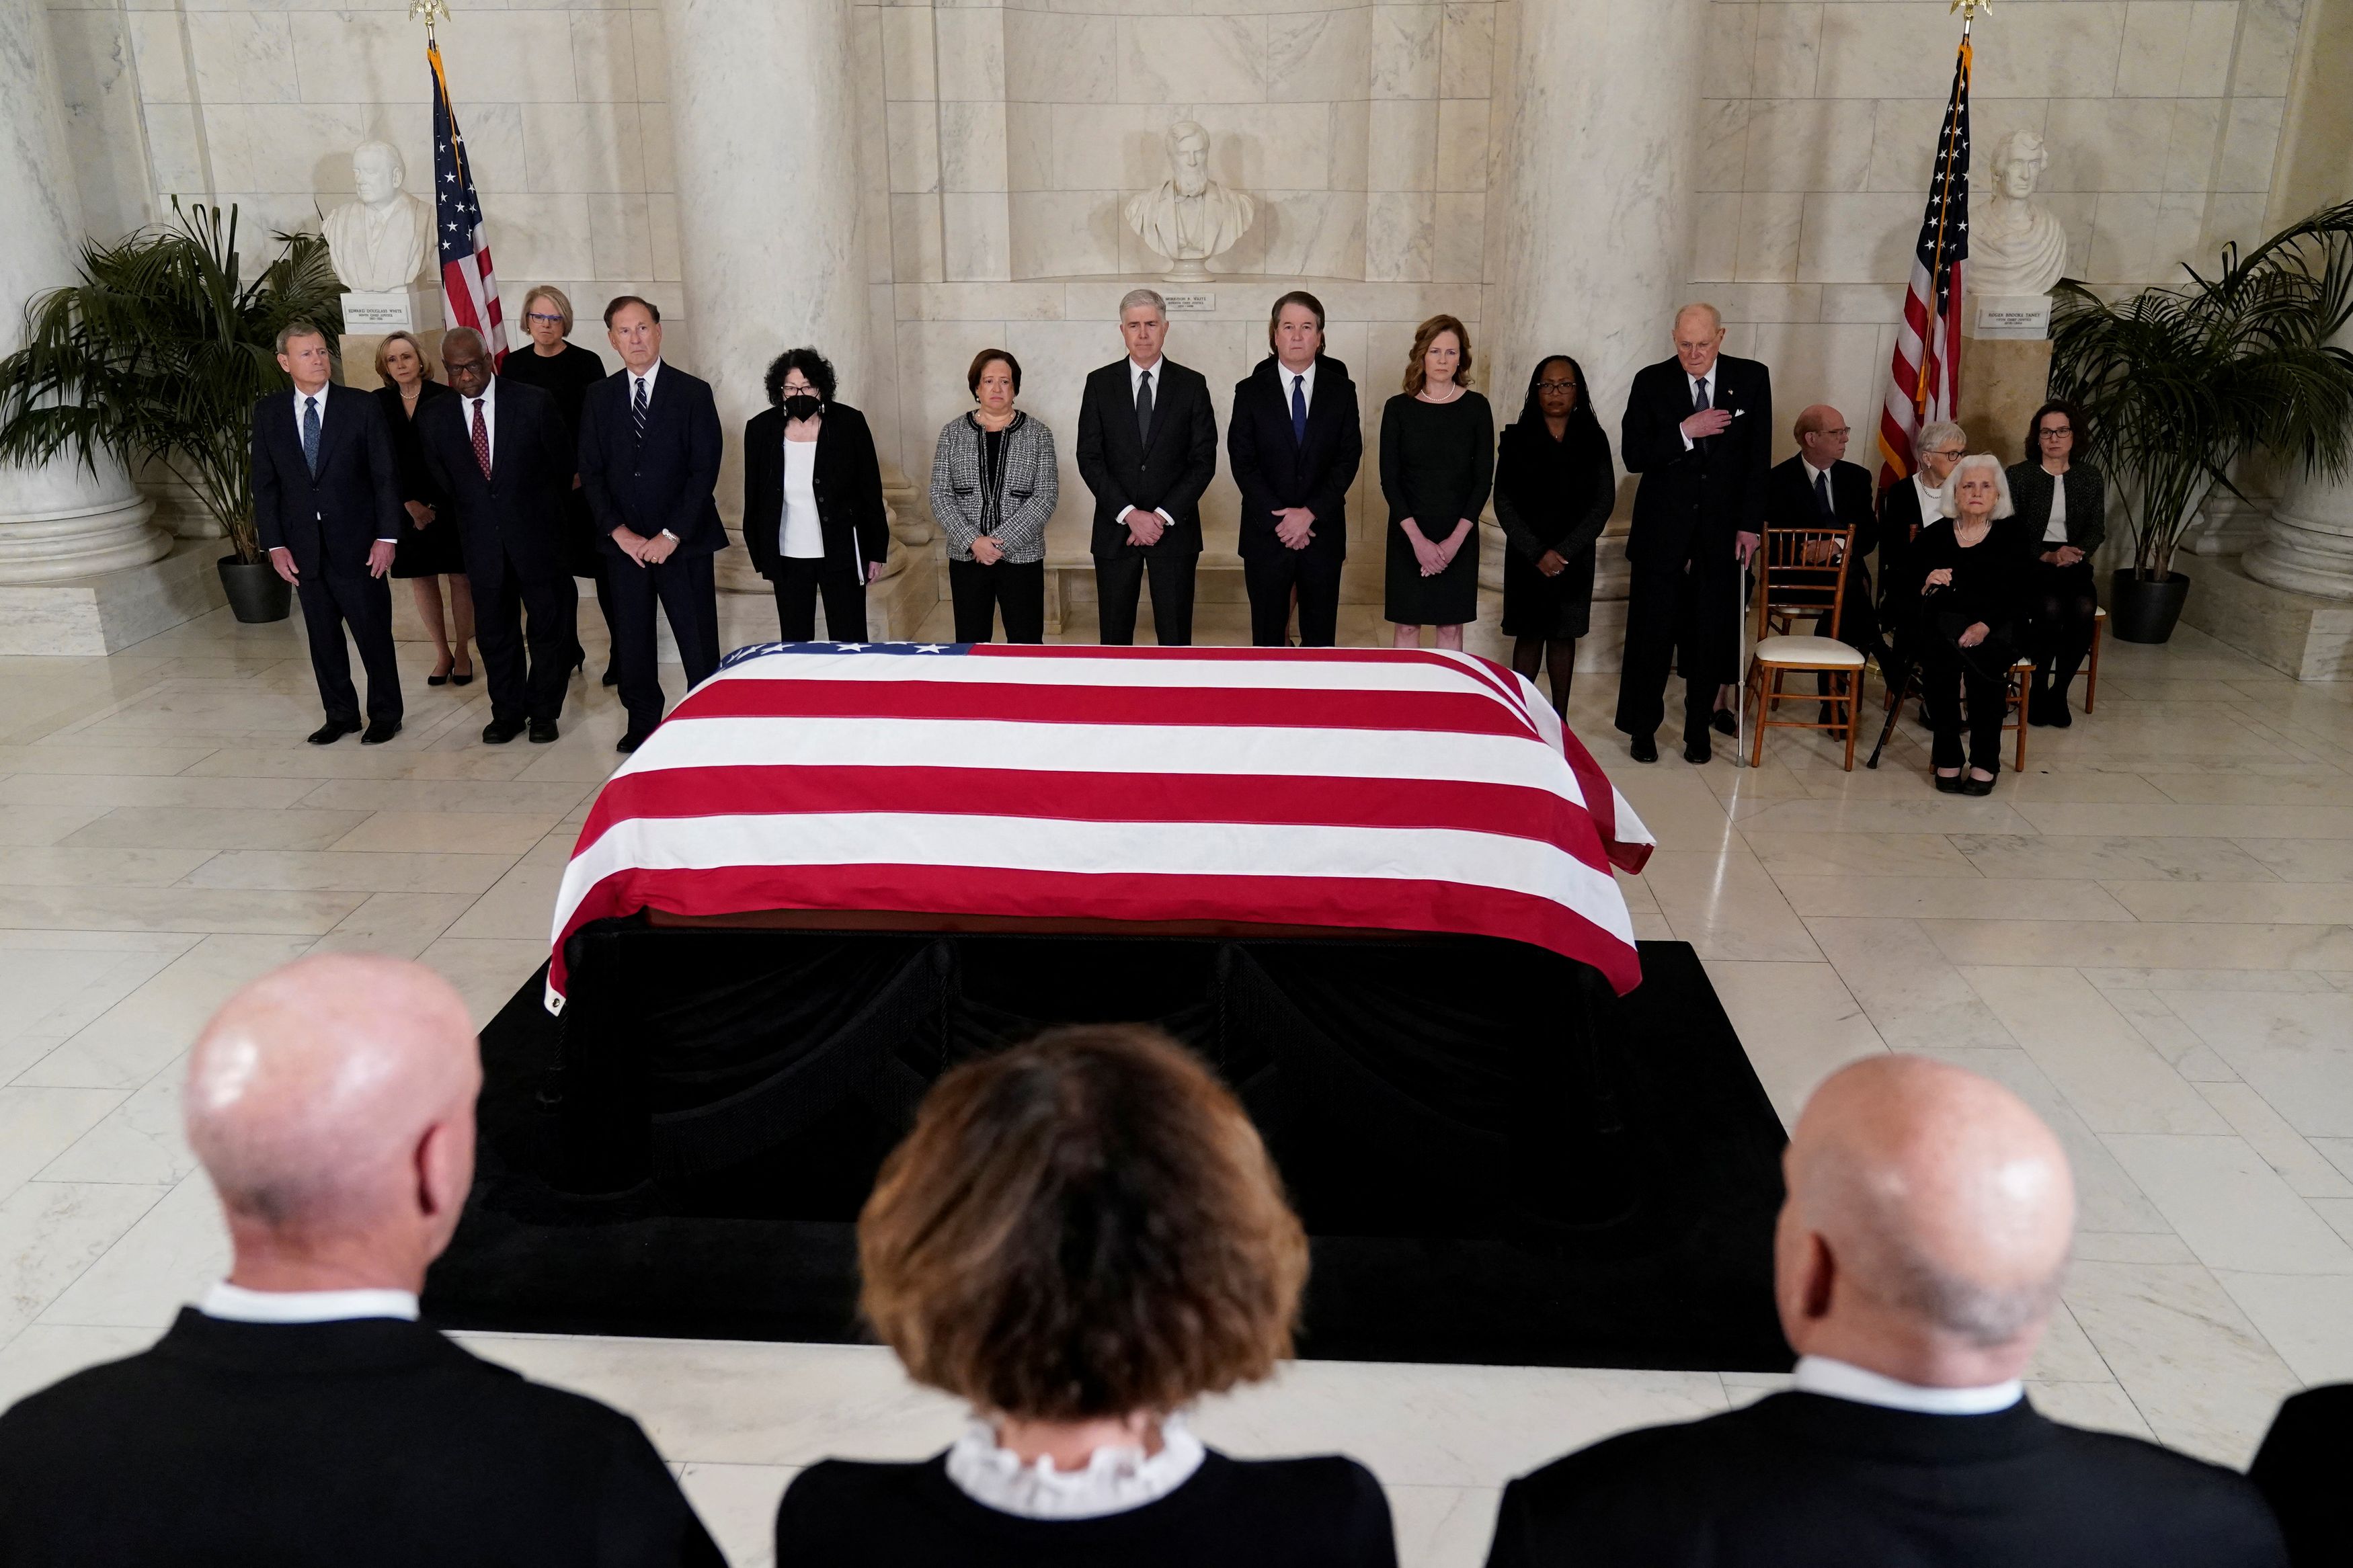 photos: the late sandra day o’connor, the first woman to serve as a u.s. supreme court justice, lies in repose at the supreme court.